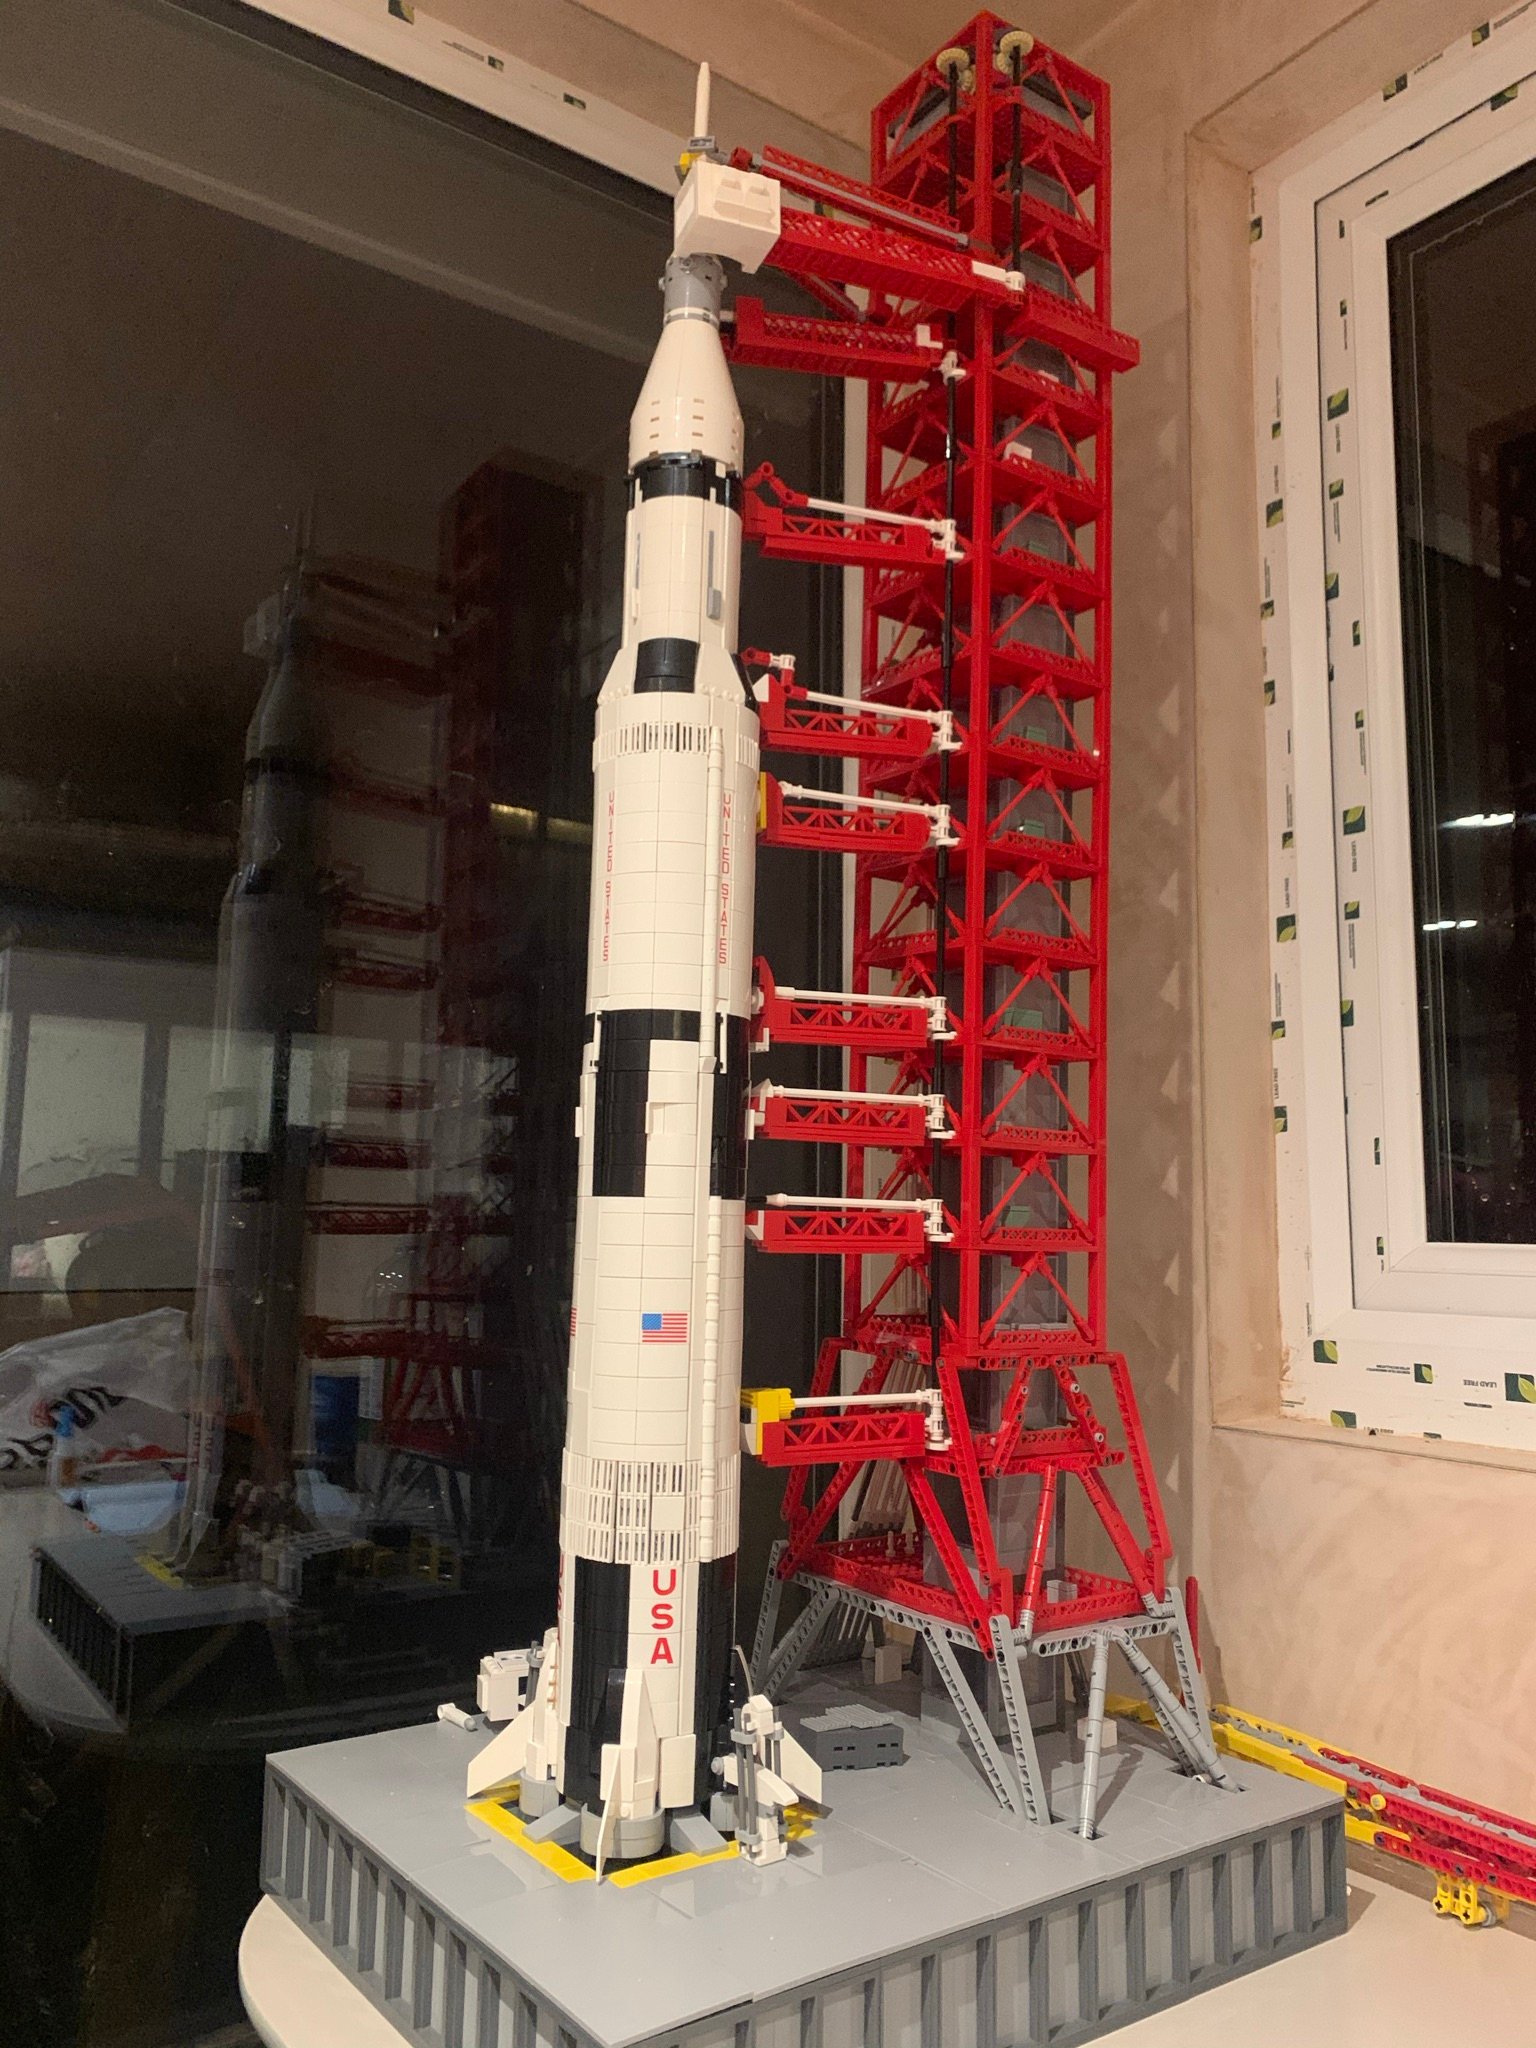 We bought knockoff Lego launchpad kit from China for our Saturn V rocket so you have to • The Register